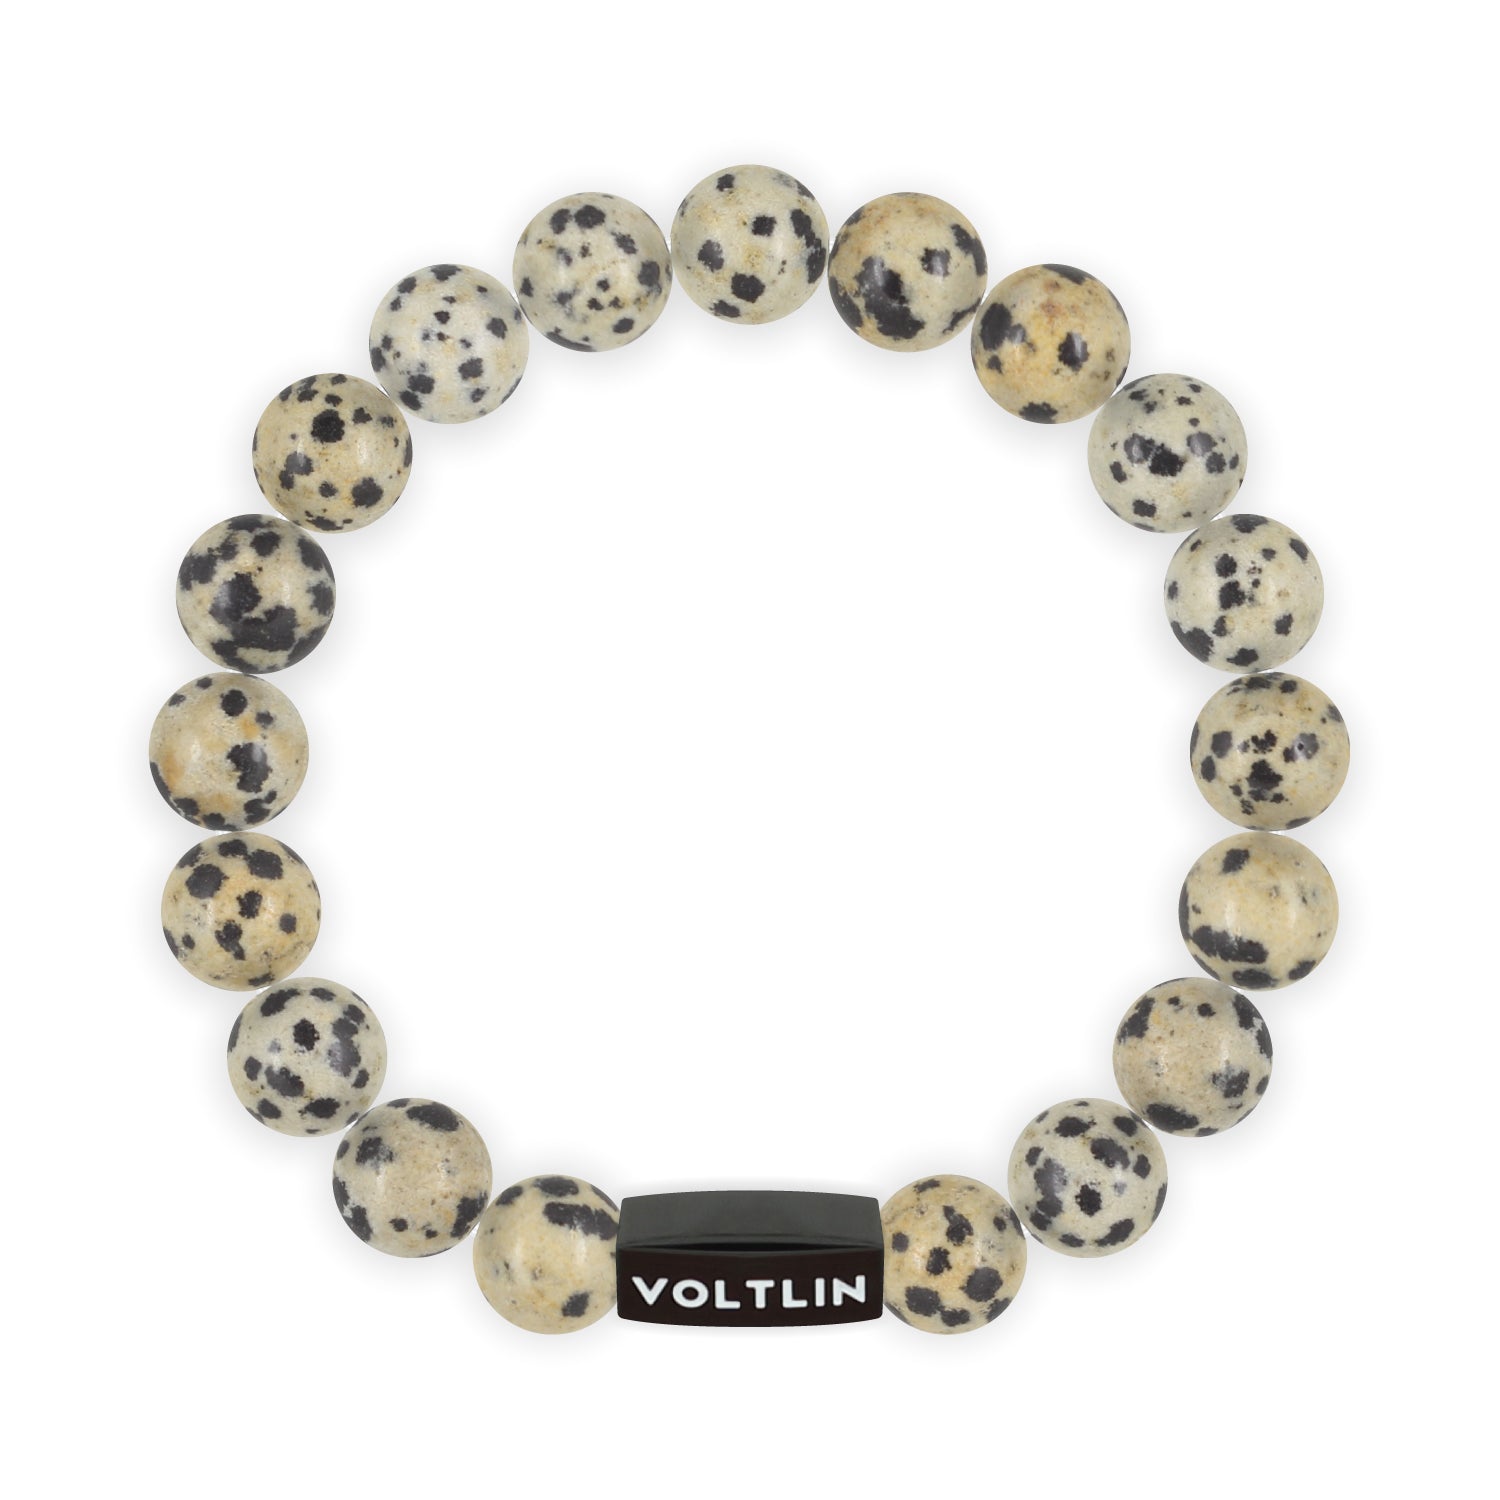 Buy 8 Strand of Natural Dalmatian Jasper Round Shape 8 mm Smooth Beads for  DIY Jewelry Making - Bracelet, Necklace, Earring Online at Lowest Price  Ever in India | Check Reviews &